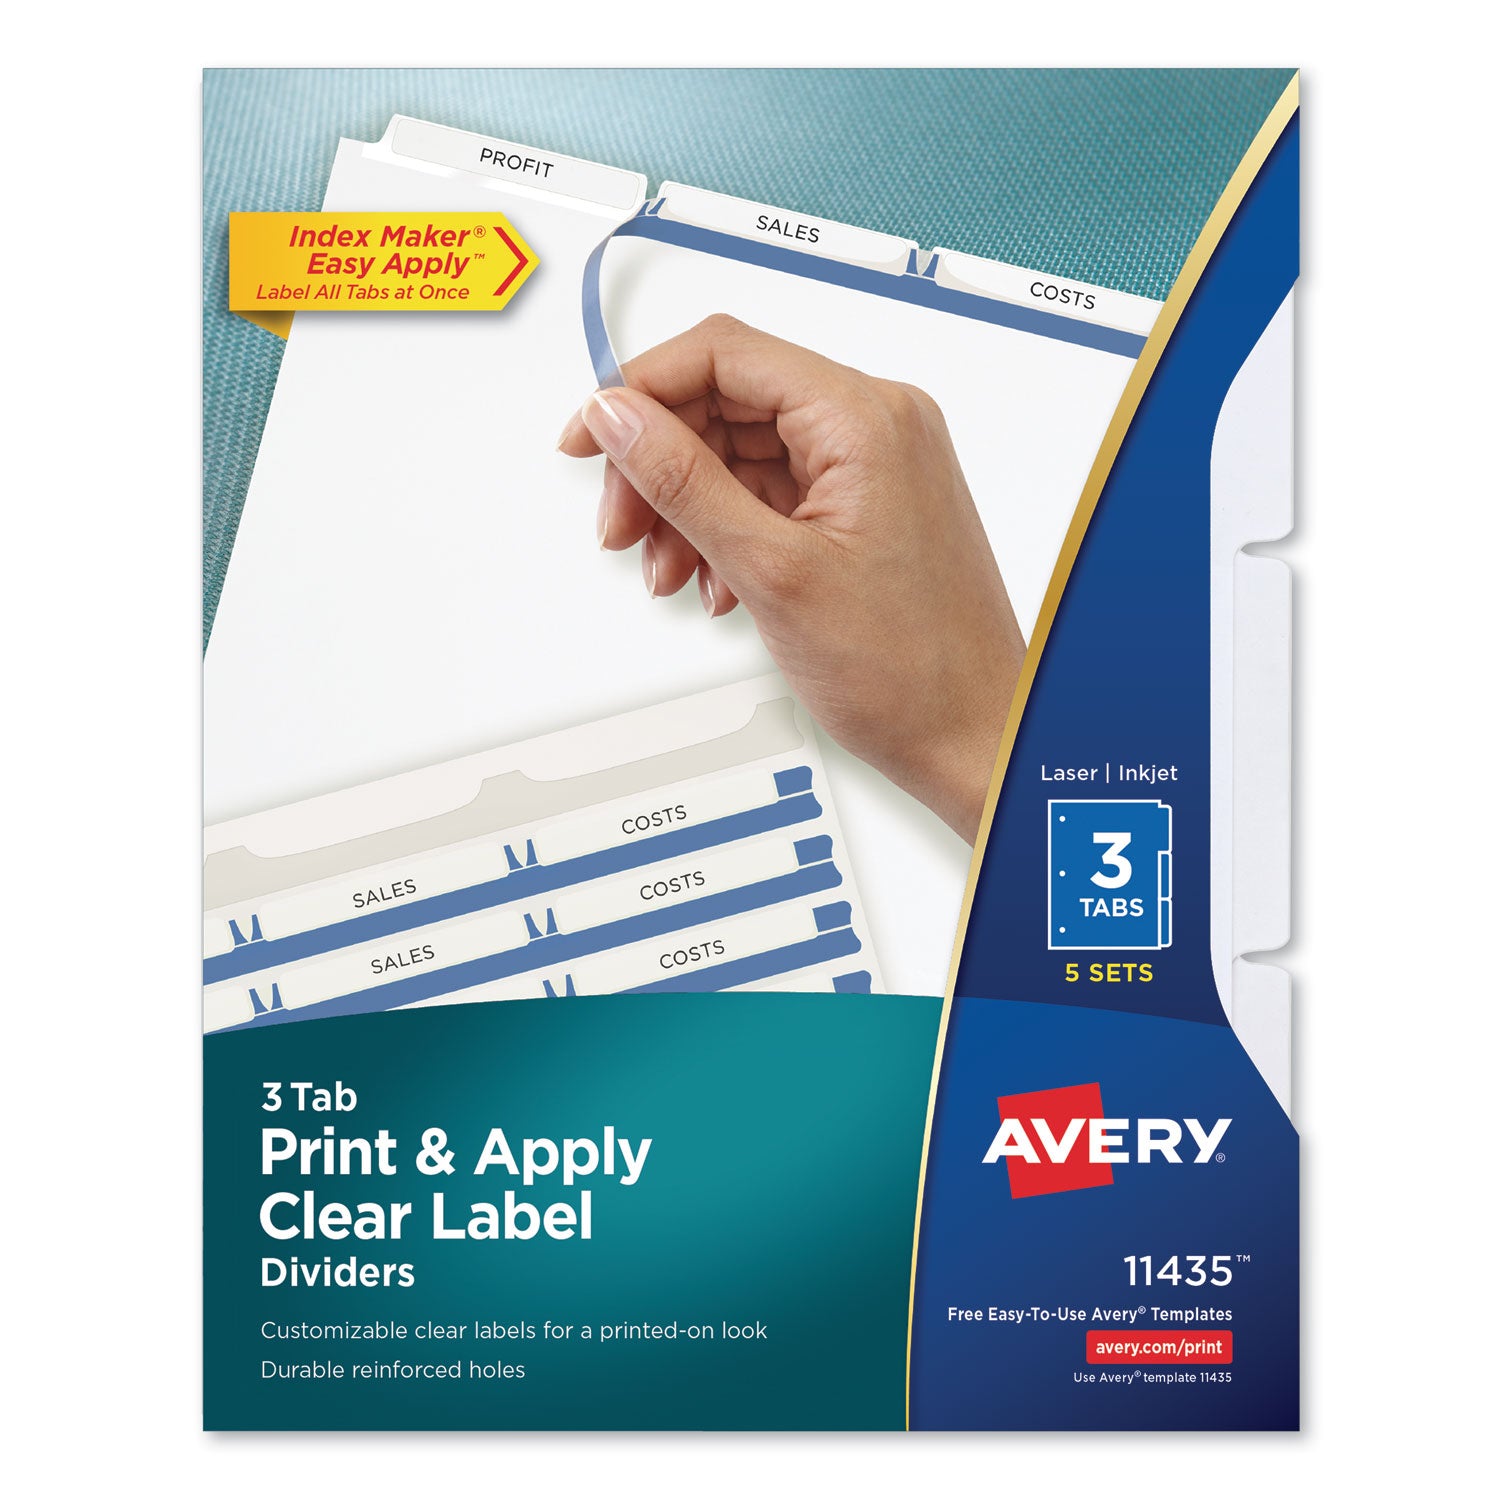 Print and Apply Index Maker Clear Label Dividers, 3-Tab, White Tabs, 11 x 8.5, White, 5 Sets - 